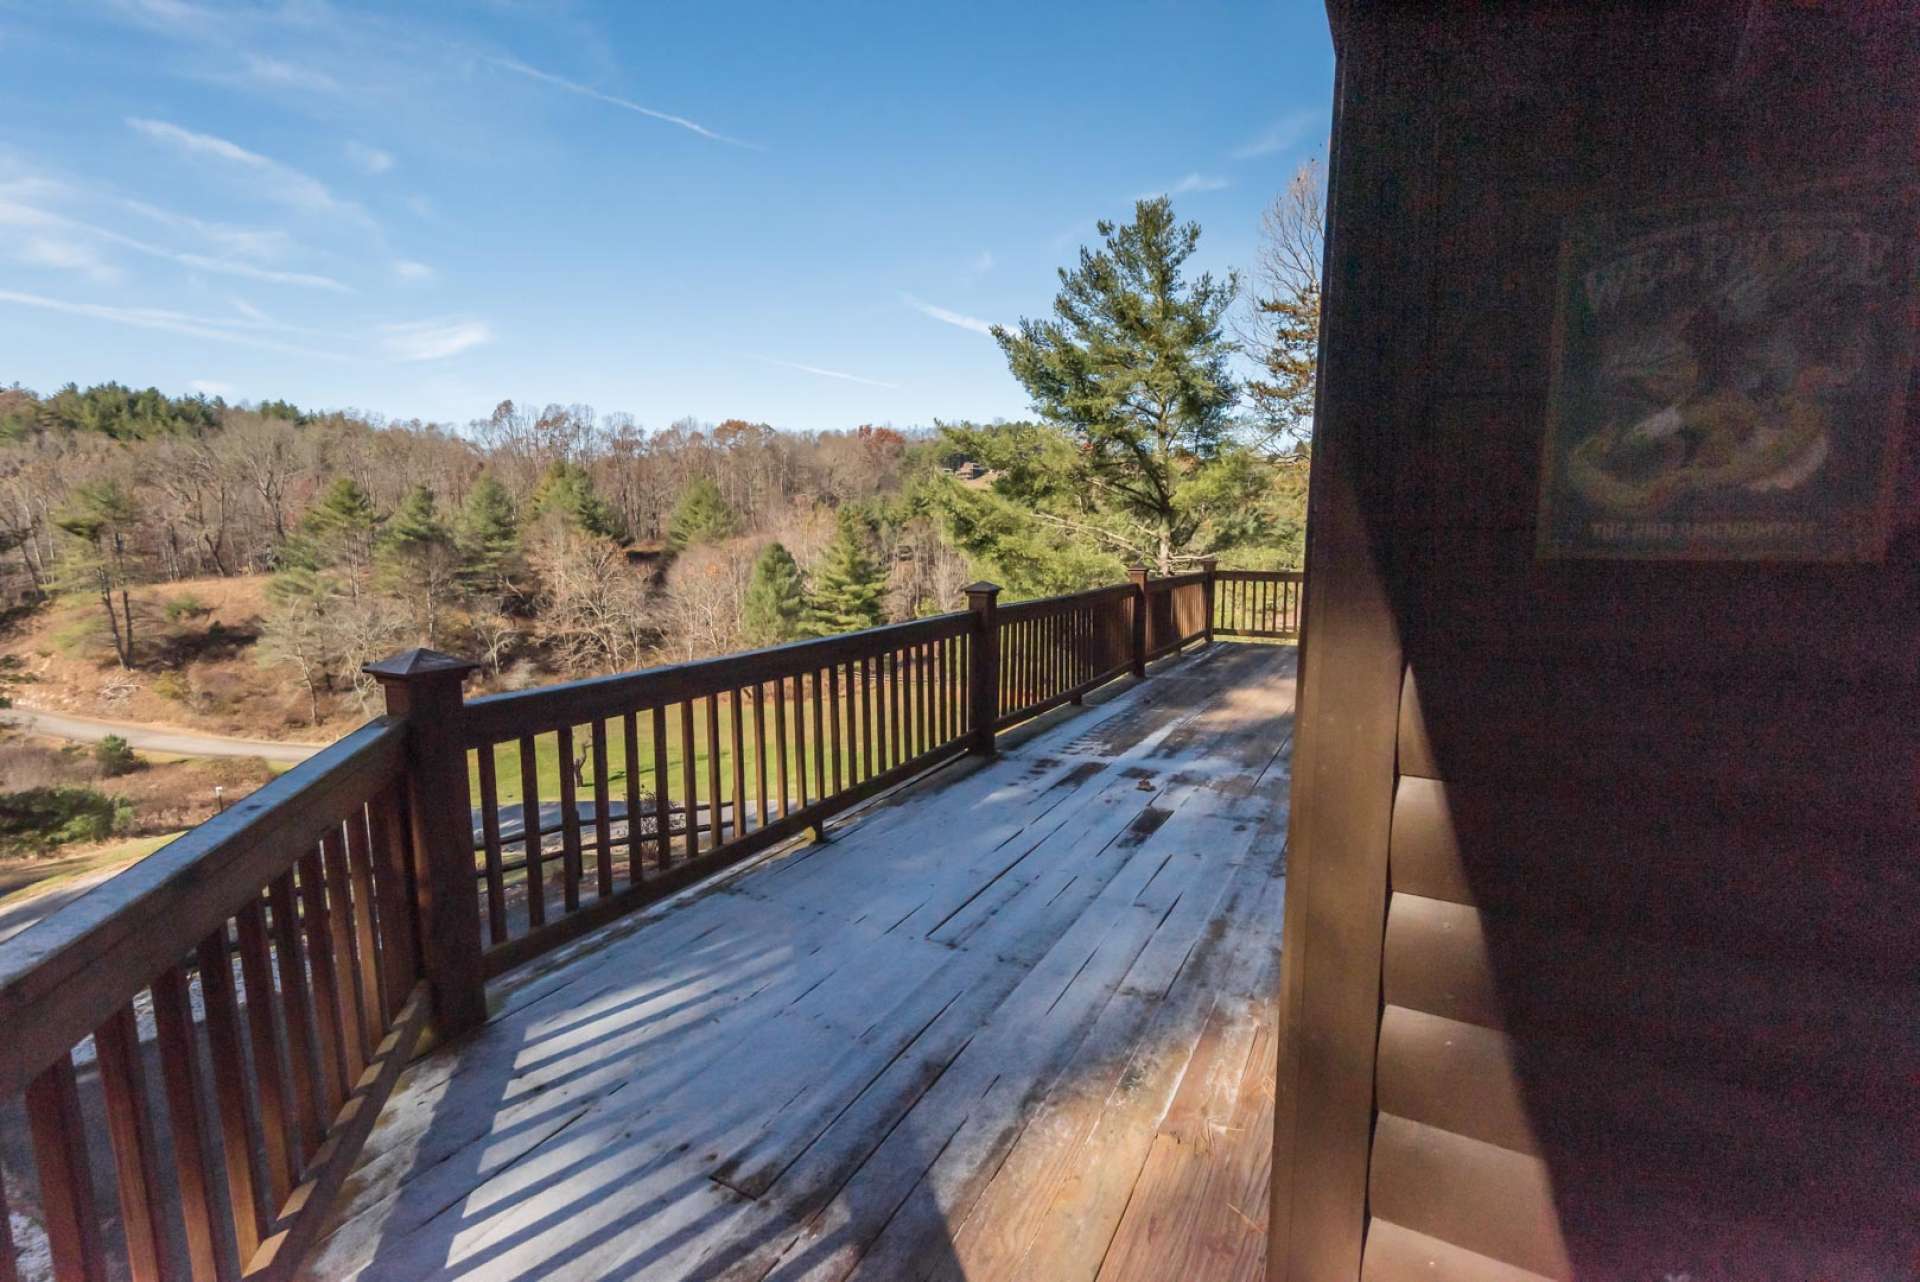 The main level offers a partially covered deck that wraps around three sides of the cabin affording you plenty of space for outdoor entertaining. Or, simply enjoy a relaxing afternoon with your favorite book and the sounds of Nature all around you.